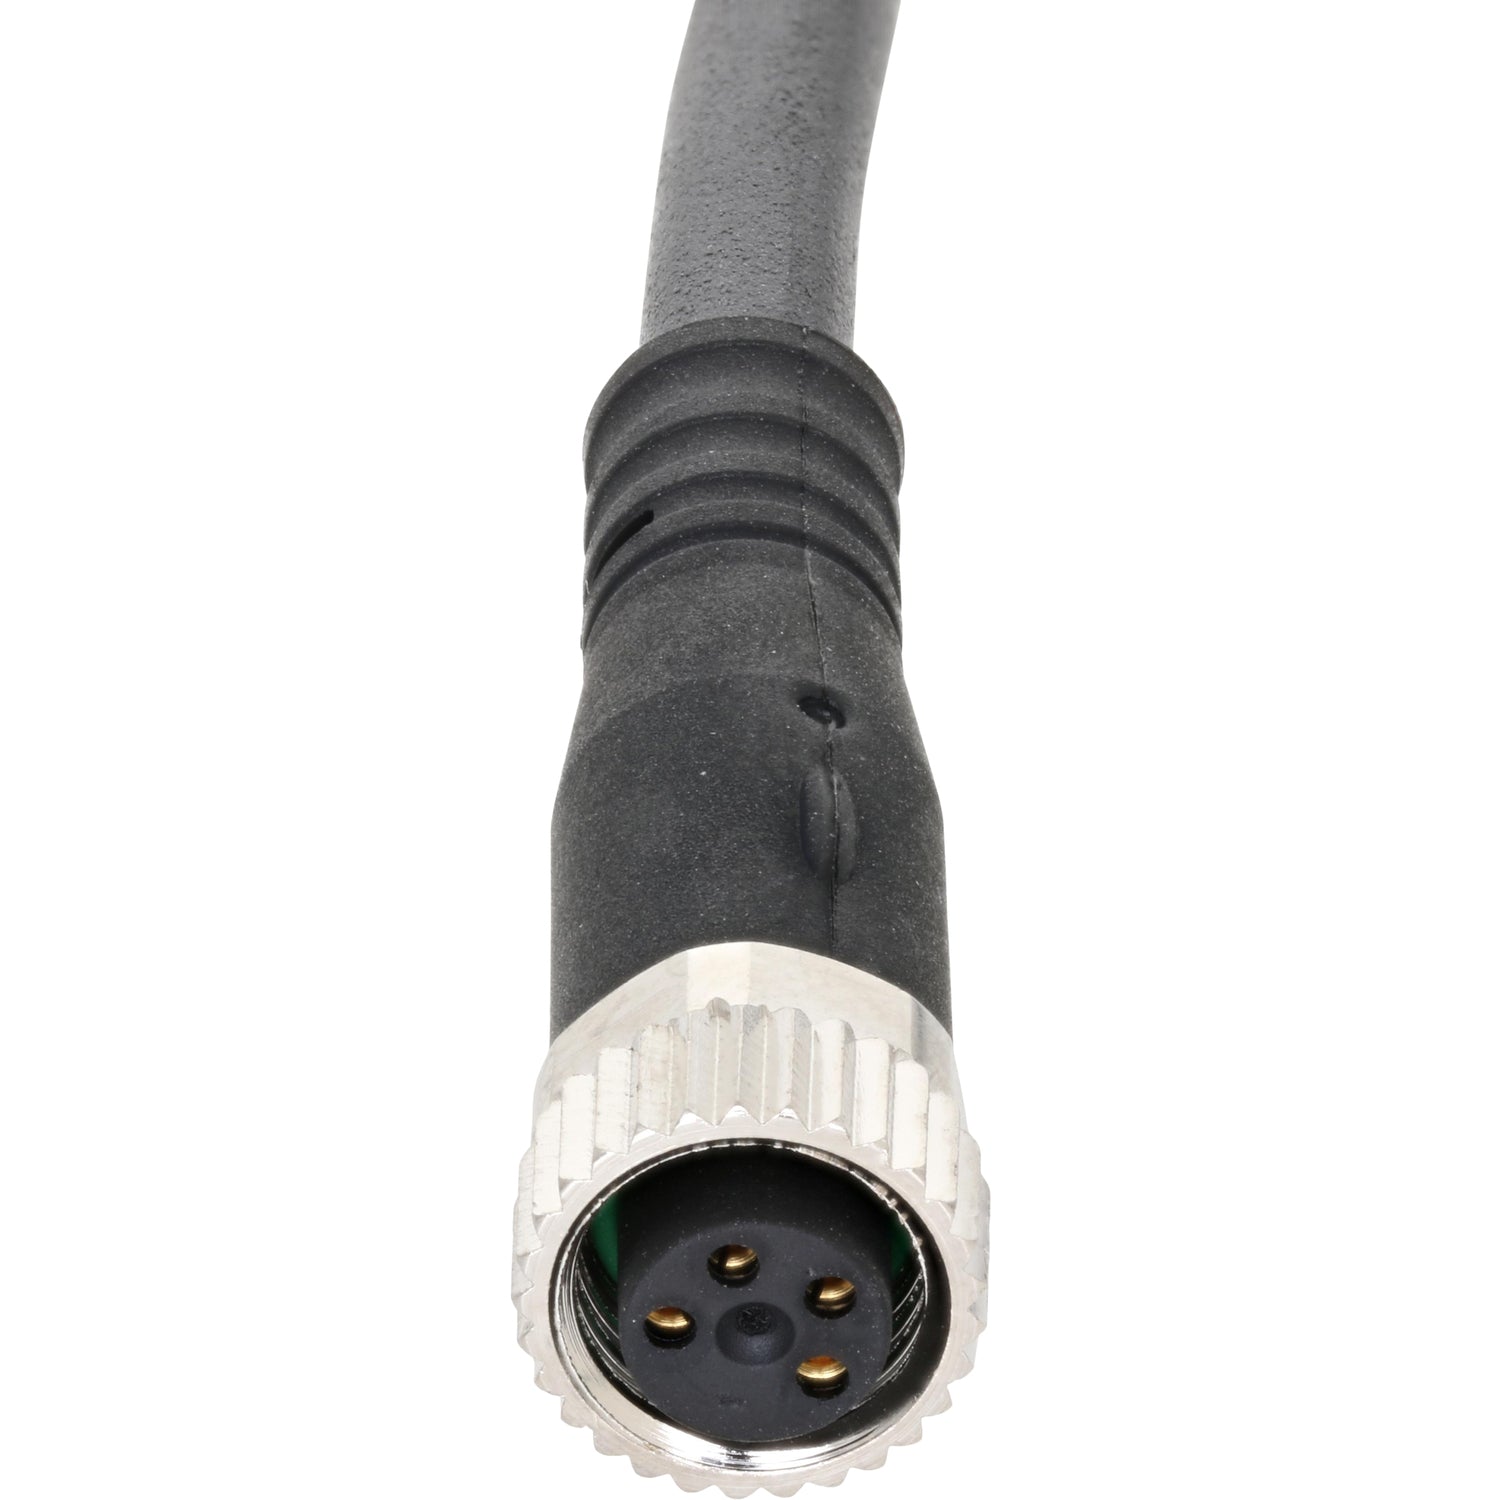 Dark grey connecting cable with nickel plated four pin female connector on white background. 